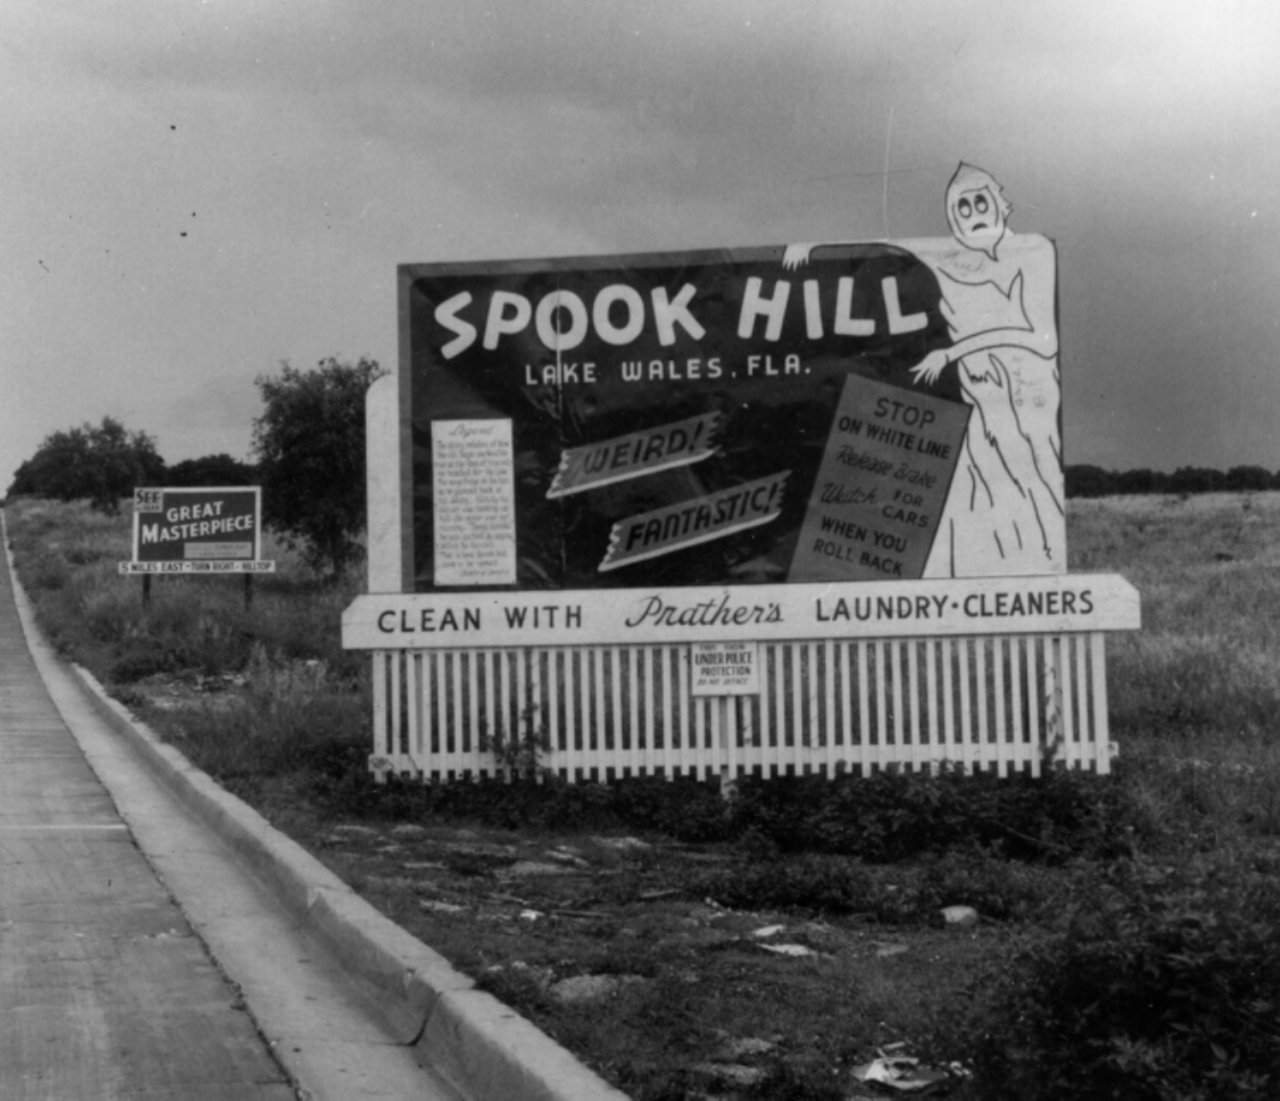  Spook Hill 
Lake Wales
Defy gravity at the mysterious Spook Hill, where a natural phenomenon makes it seem as though cars are rolling up the hill rather than down it. And you can enjoy this thrill from the comfort of your car. 
Photo via Spook Hill/Website